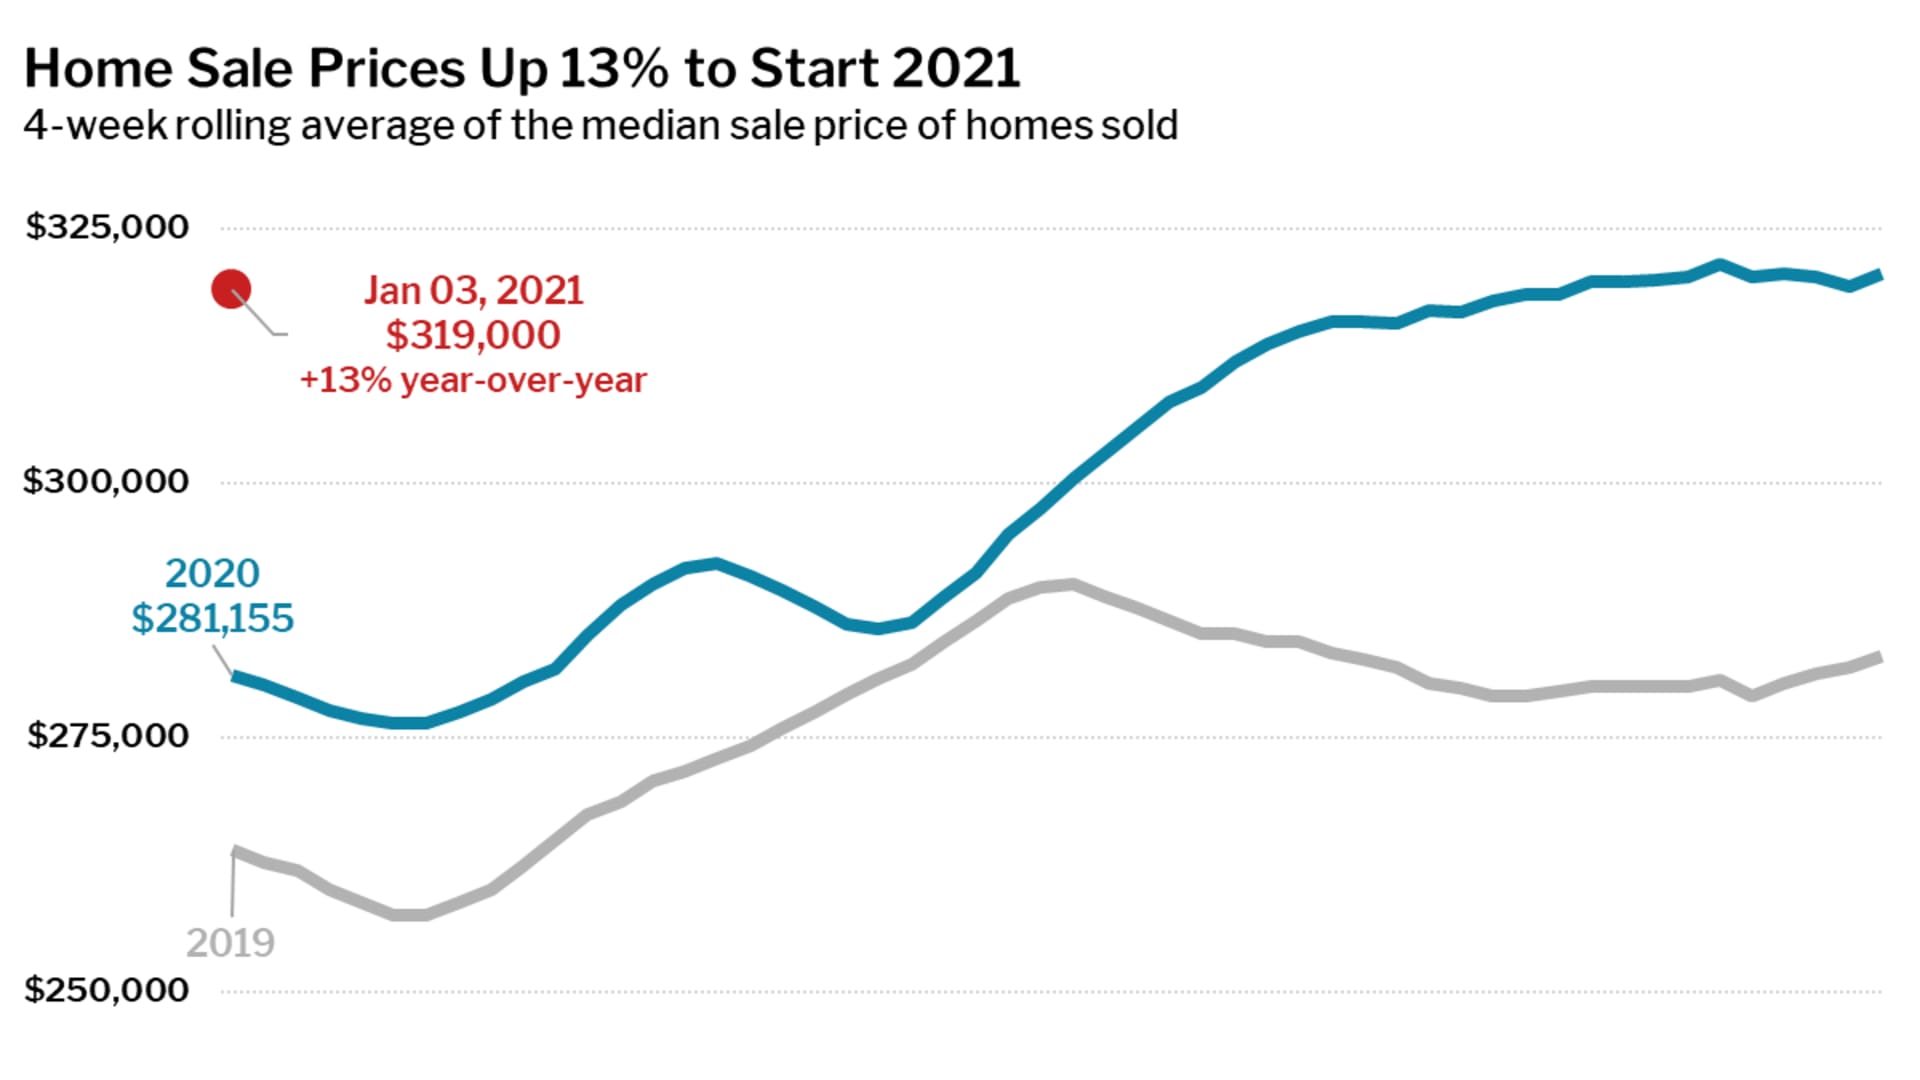 Redfin finds that the median home sale price increased 13% year over year to $319,000 as of January 3, 2020. 